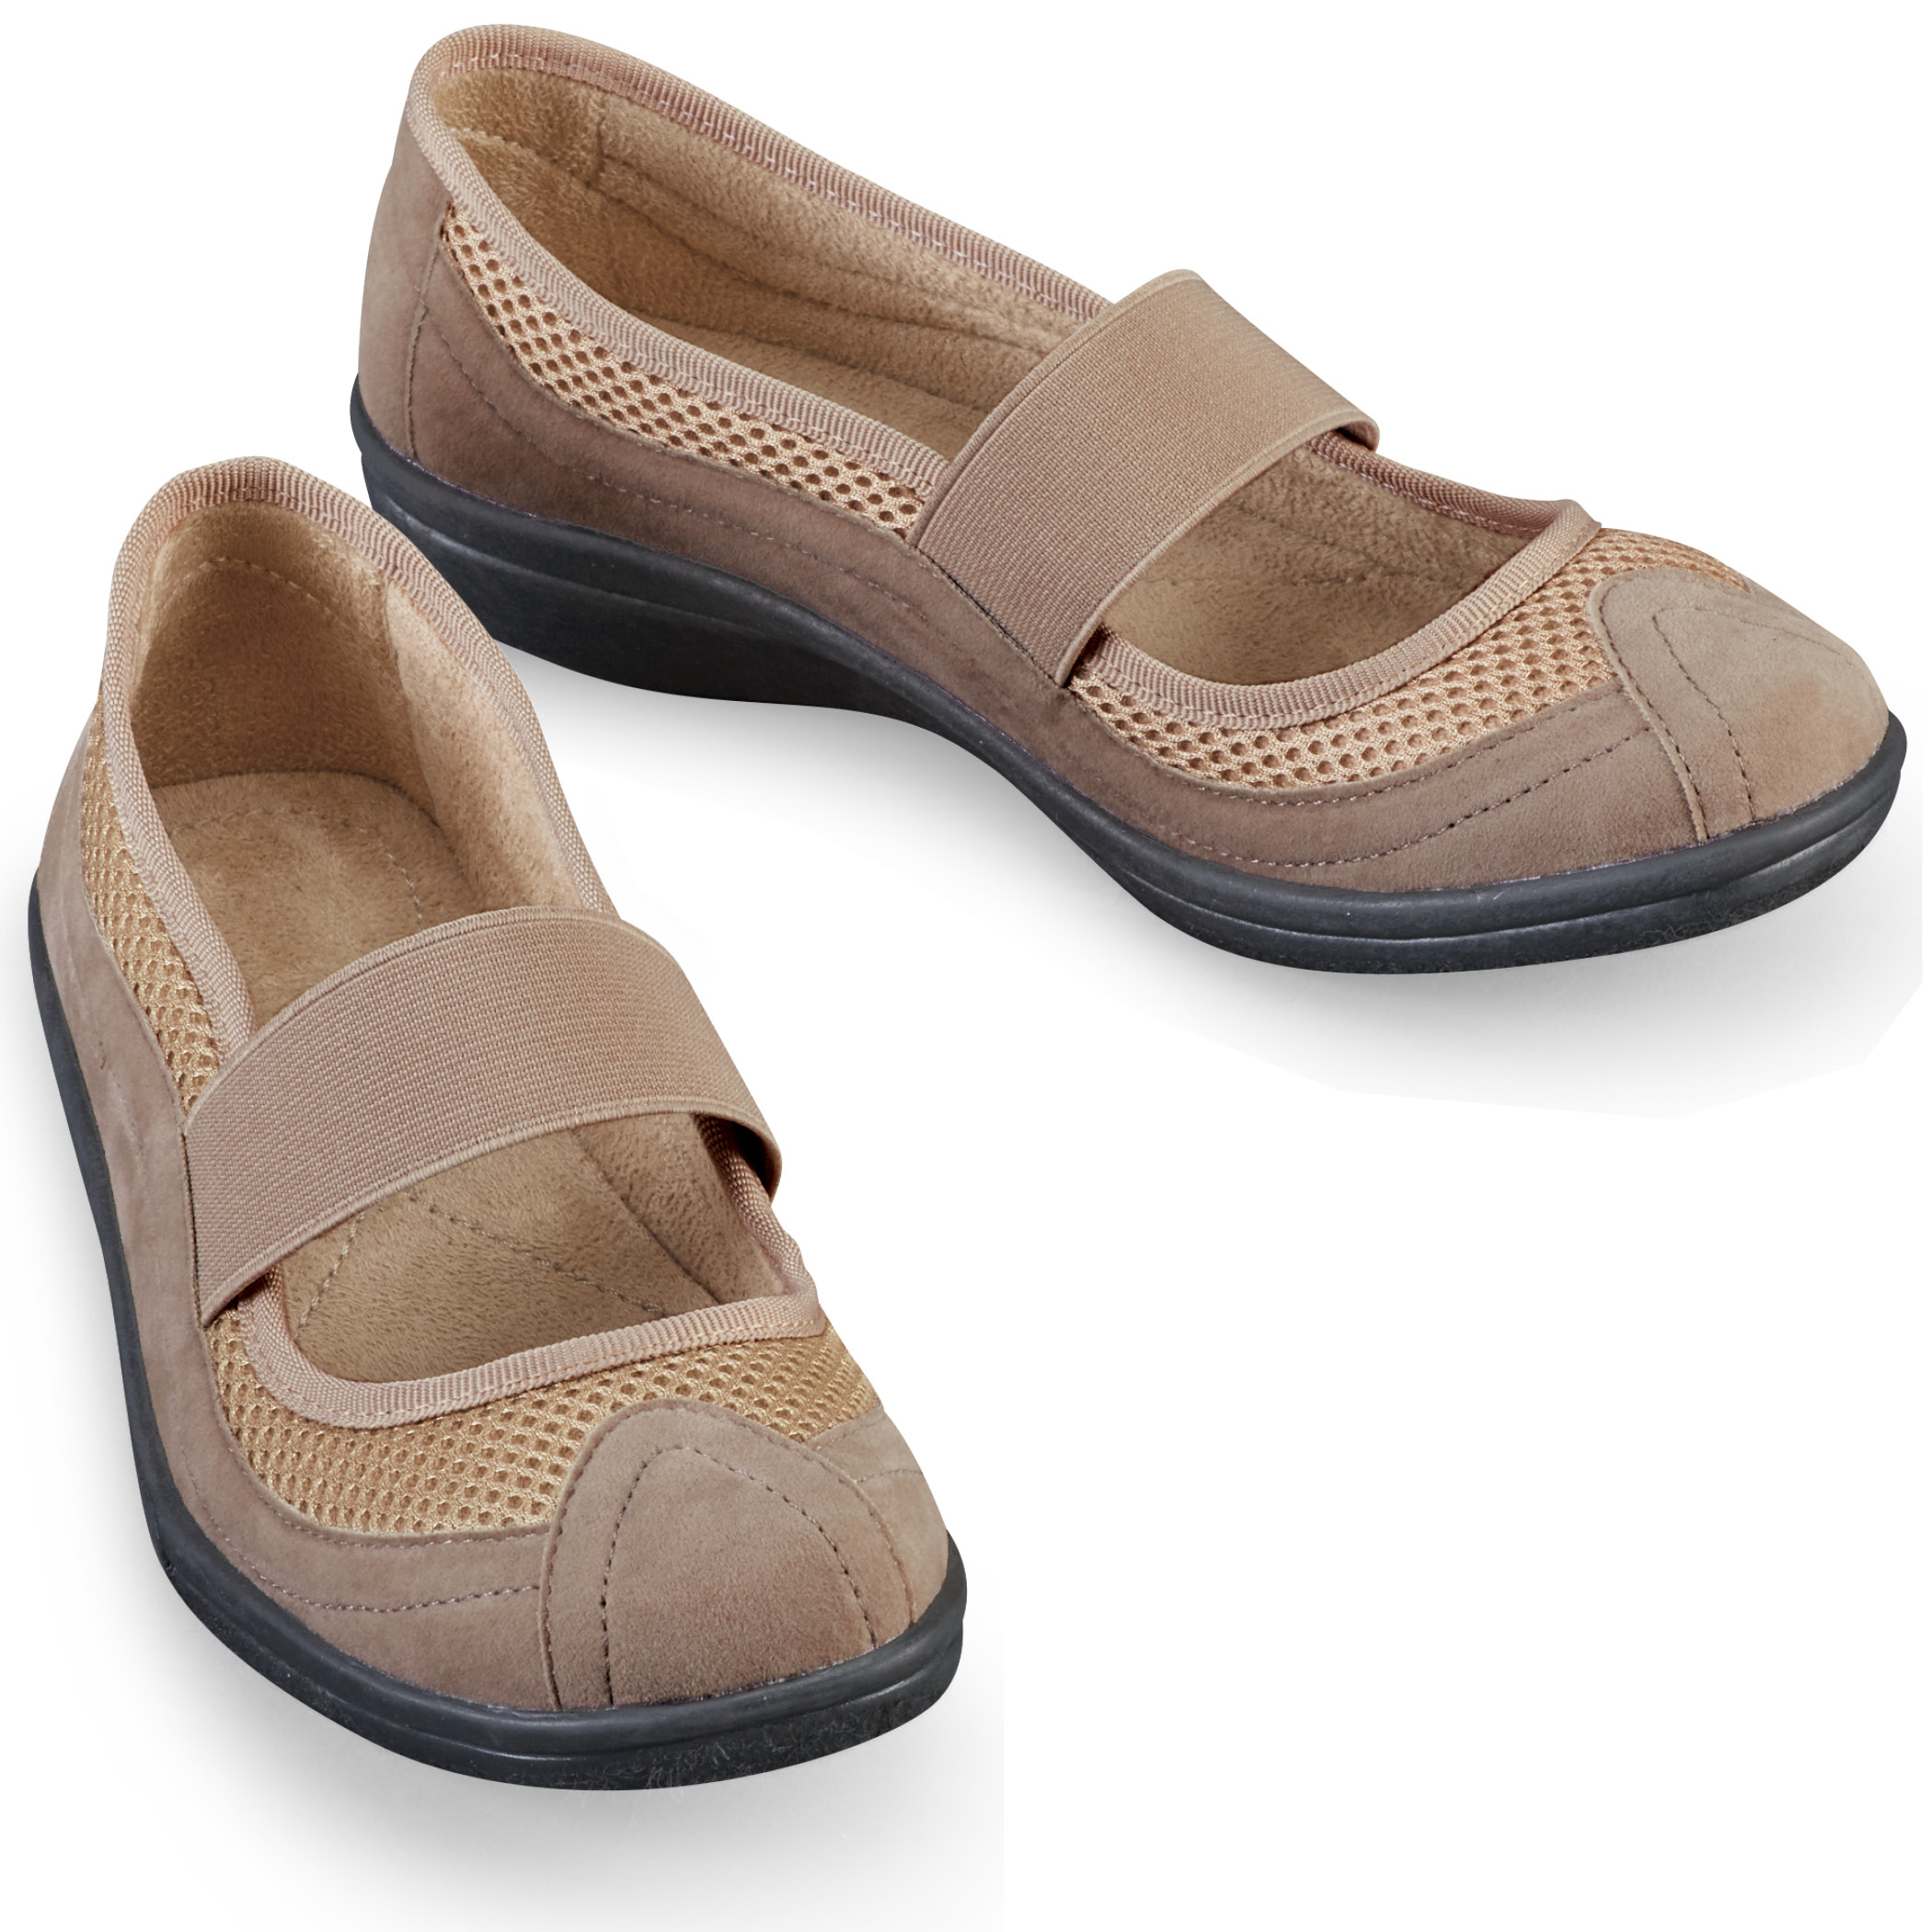 Collections Etc Sporty Stretch Strap Mary Jane Comfort Slip-on Shoes, Microsuede Mesh Uppers, Insoles - image 2 of 2